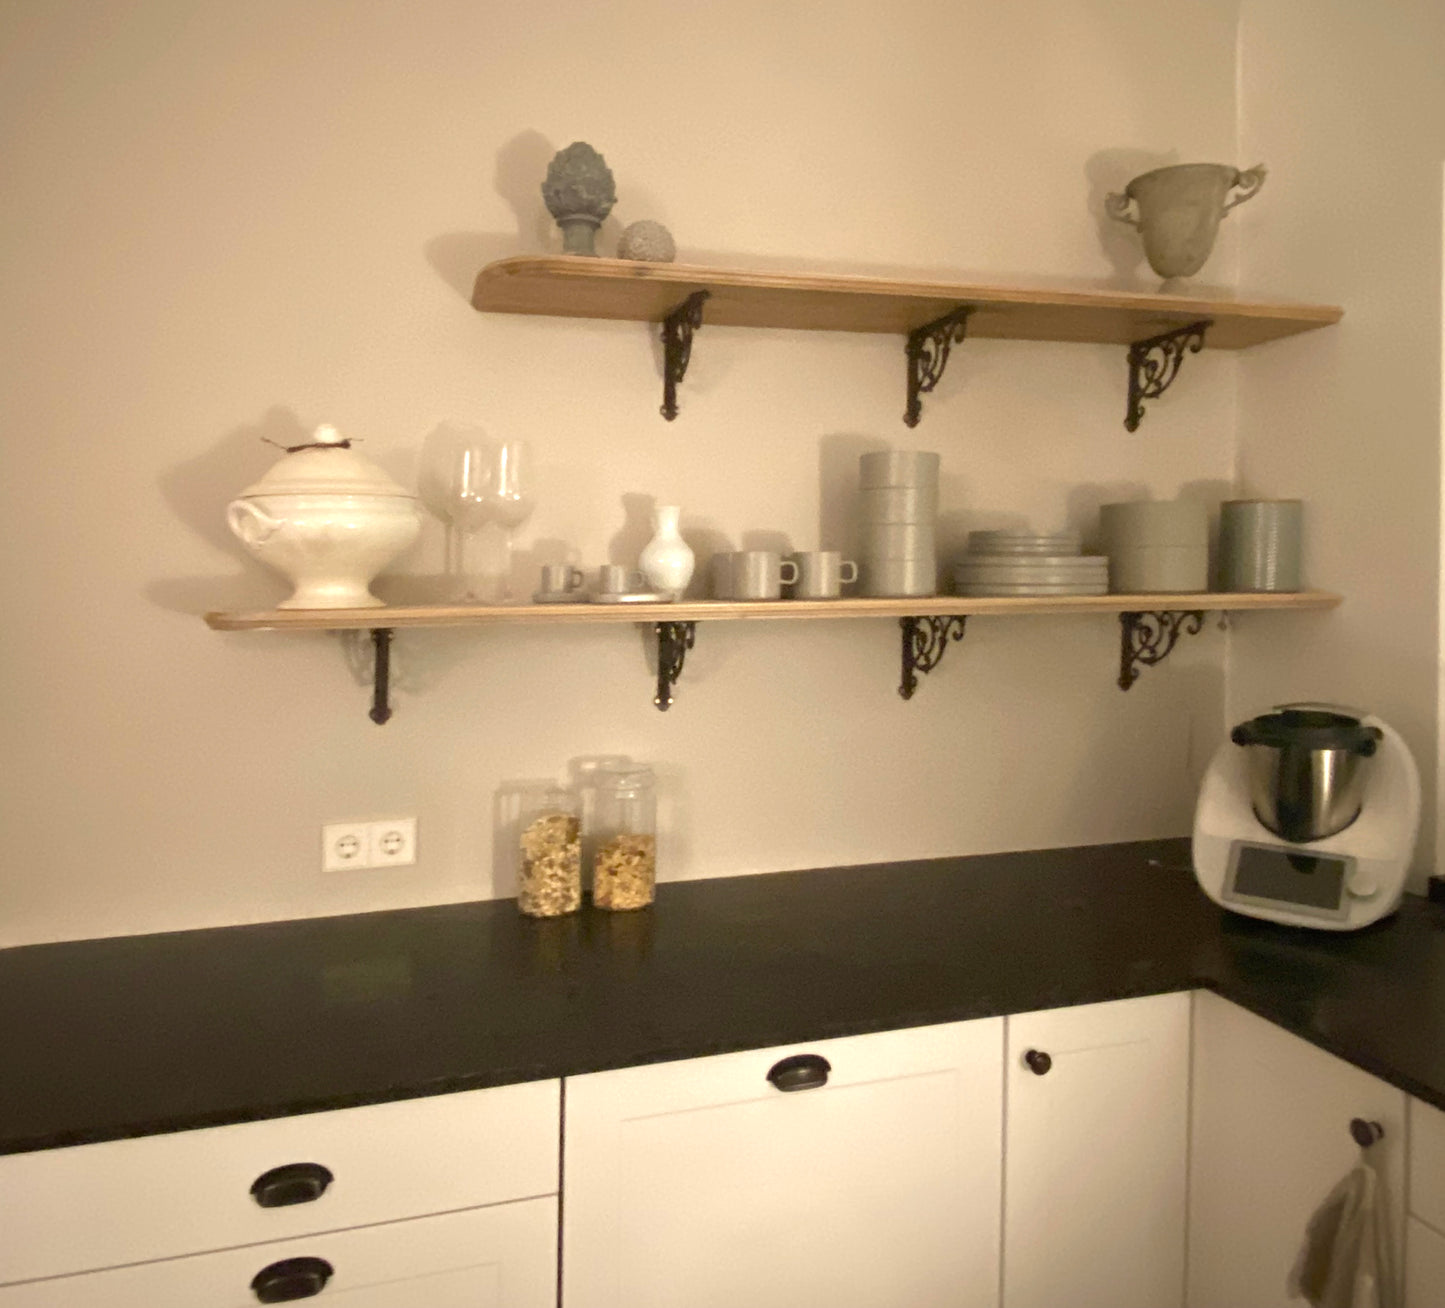 "Fina" - Individual kitchen shelves made of solid oak, country house style